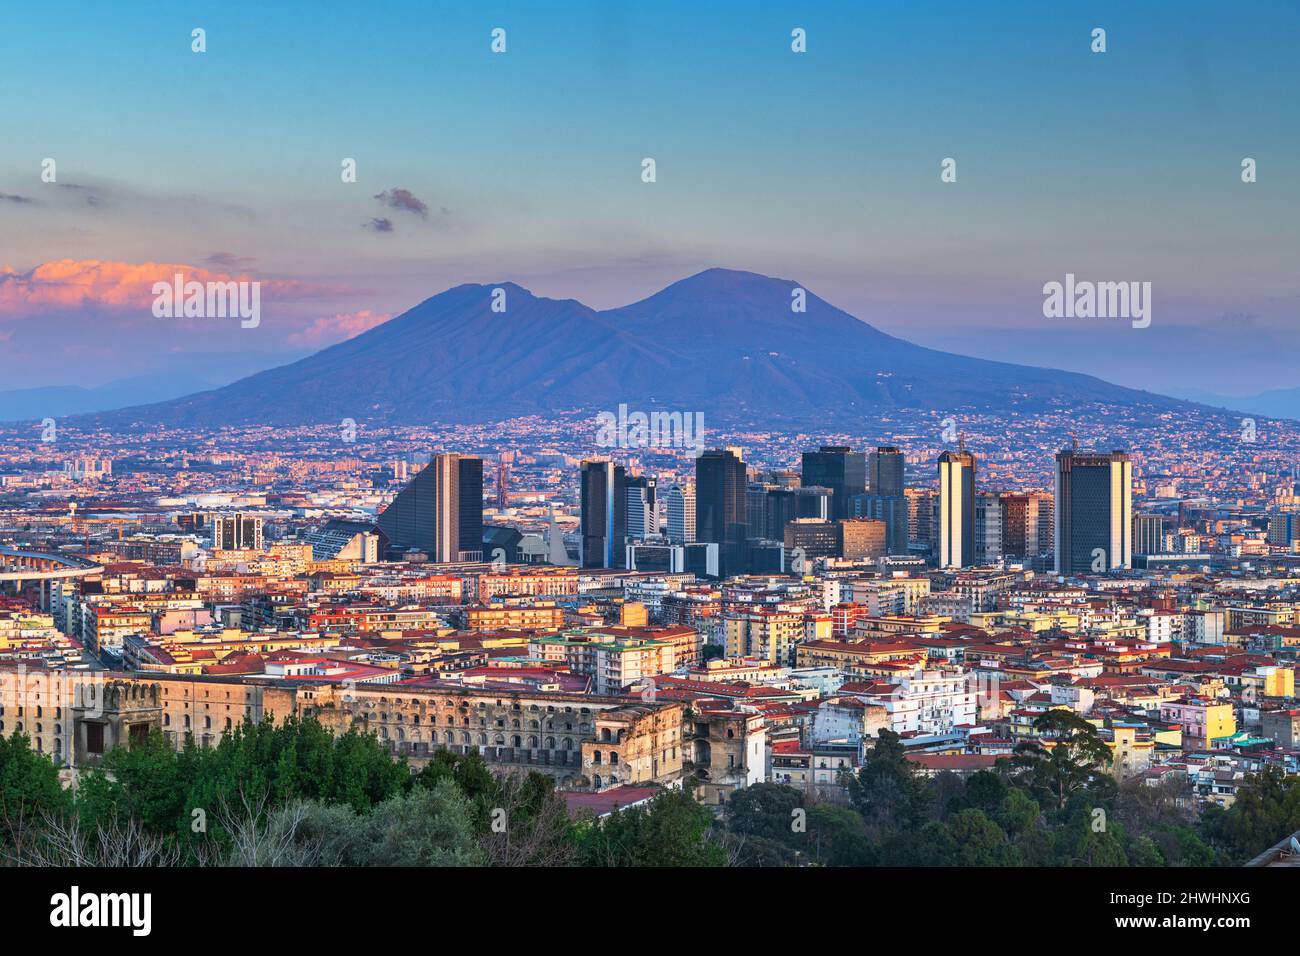 Naples, Italy with the financial district skyline under Mt. Vesuvius at twilight. Stock Photo